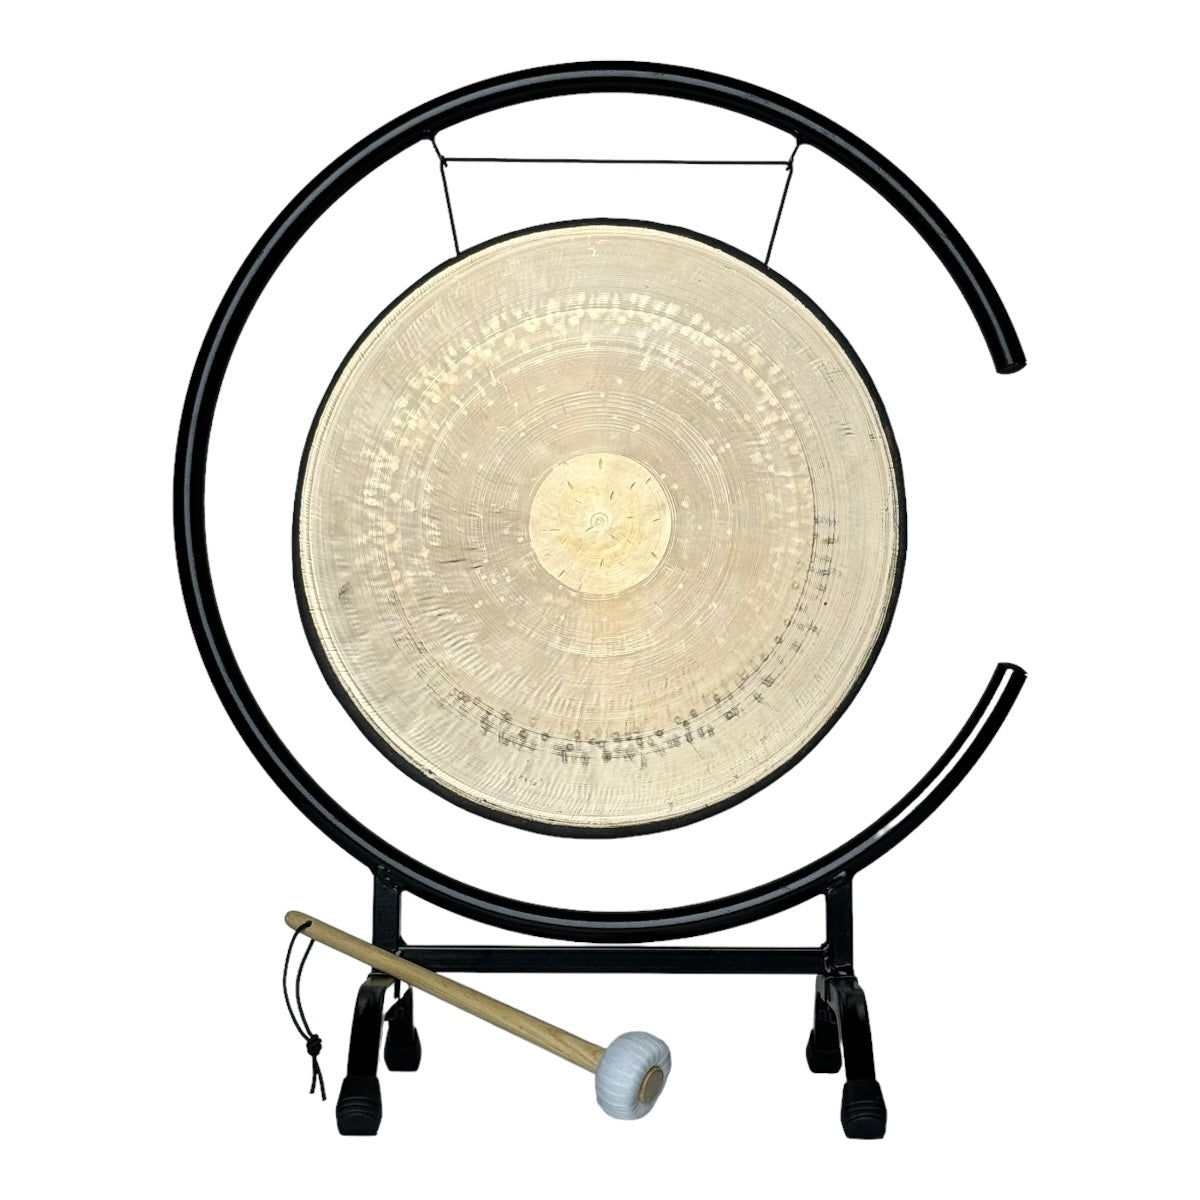 14" to 16" Gongs on GSC Gong Stand